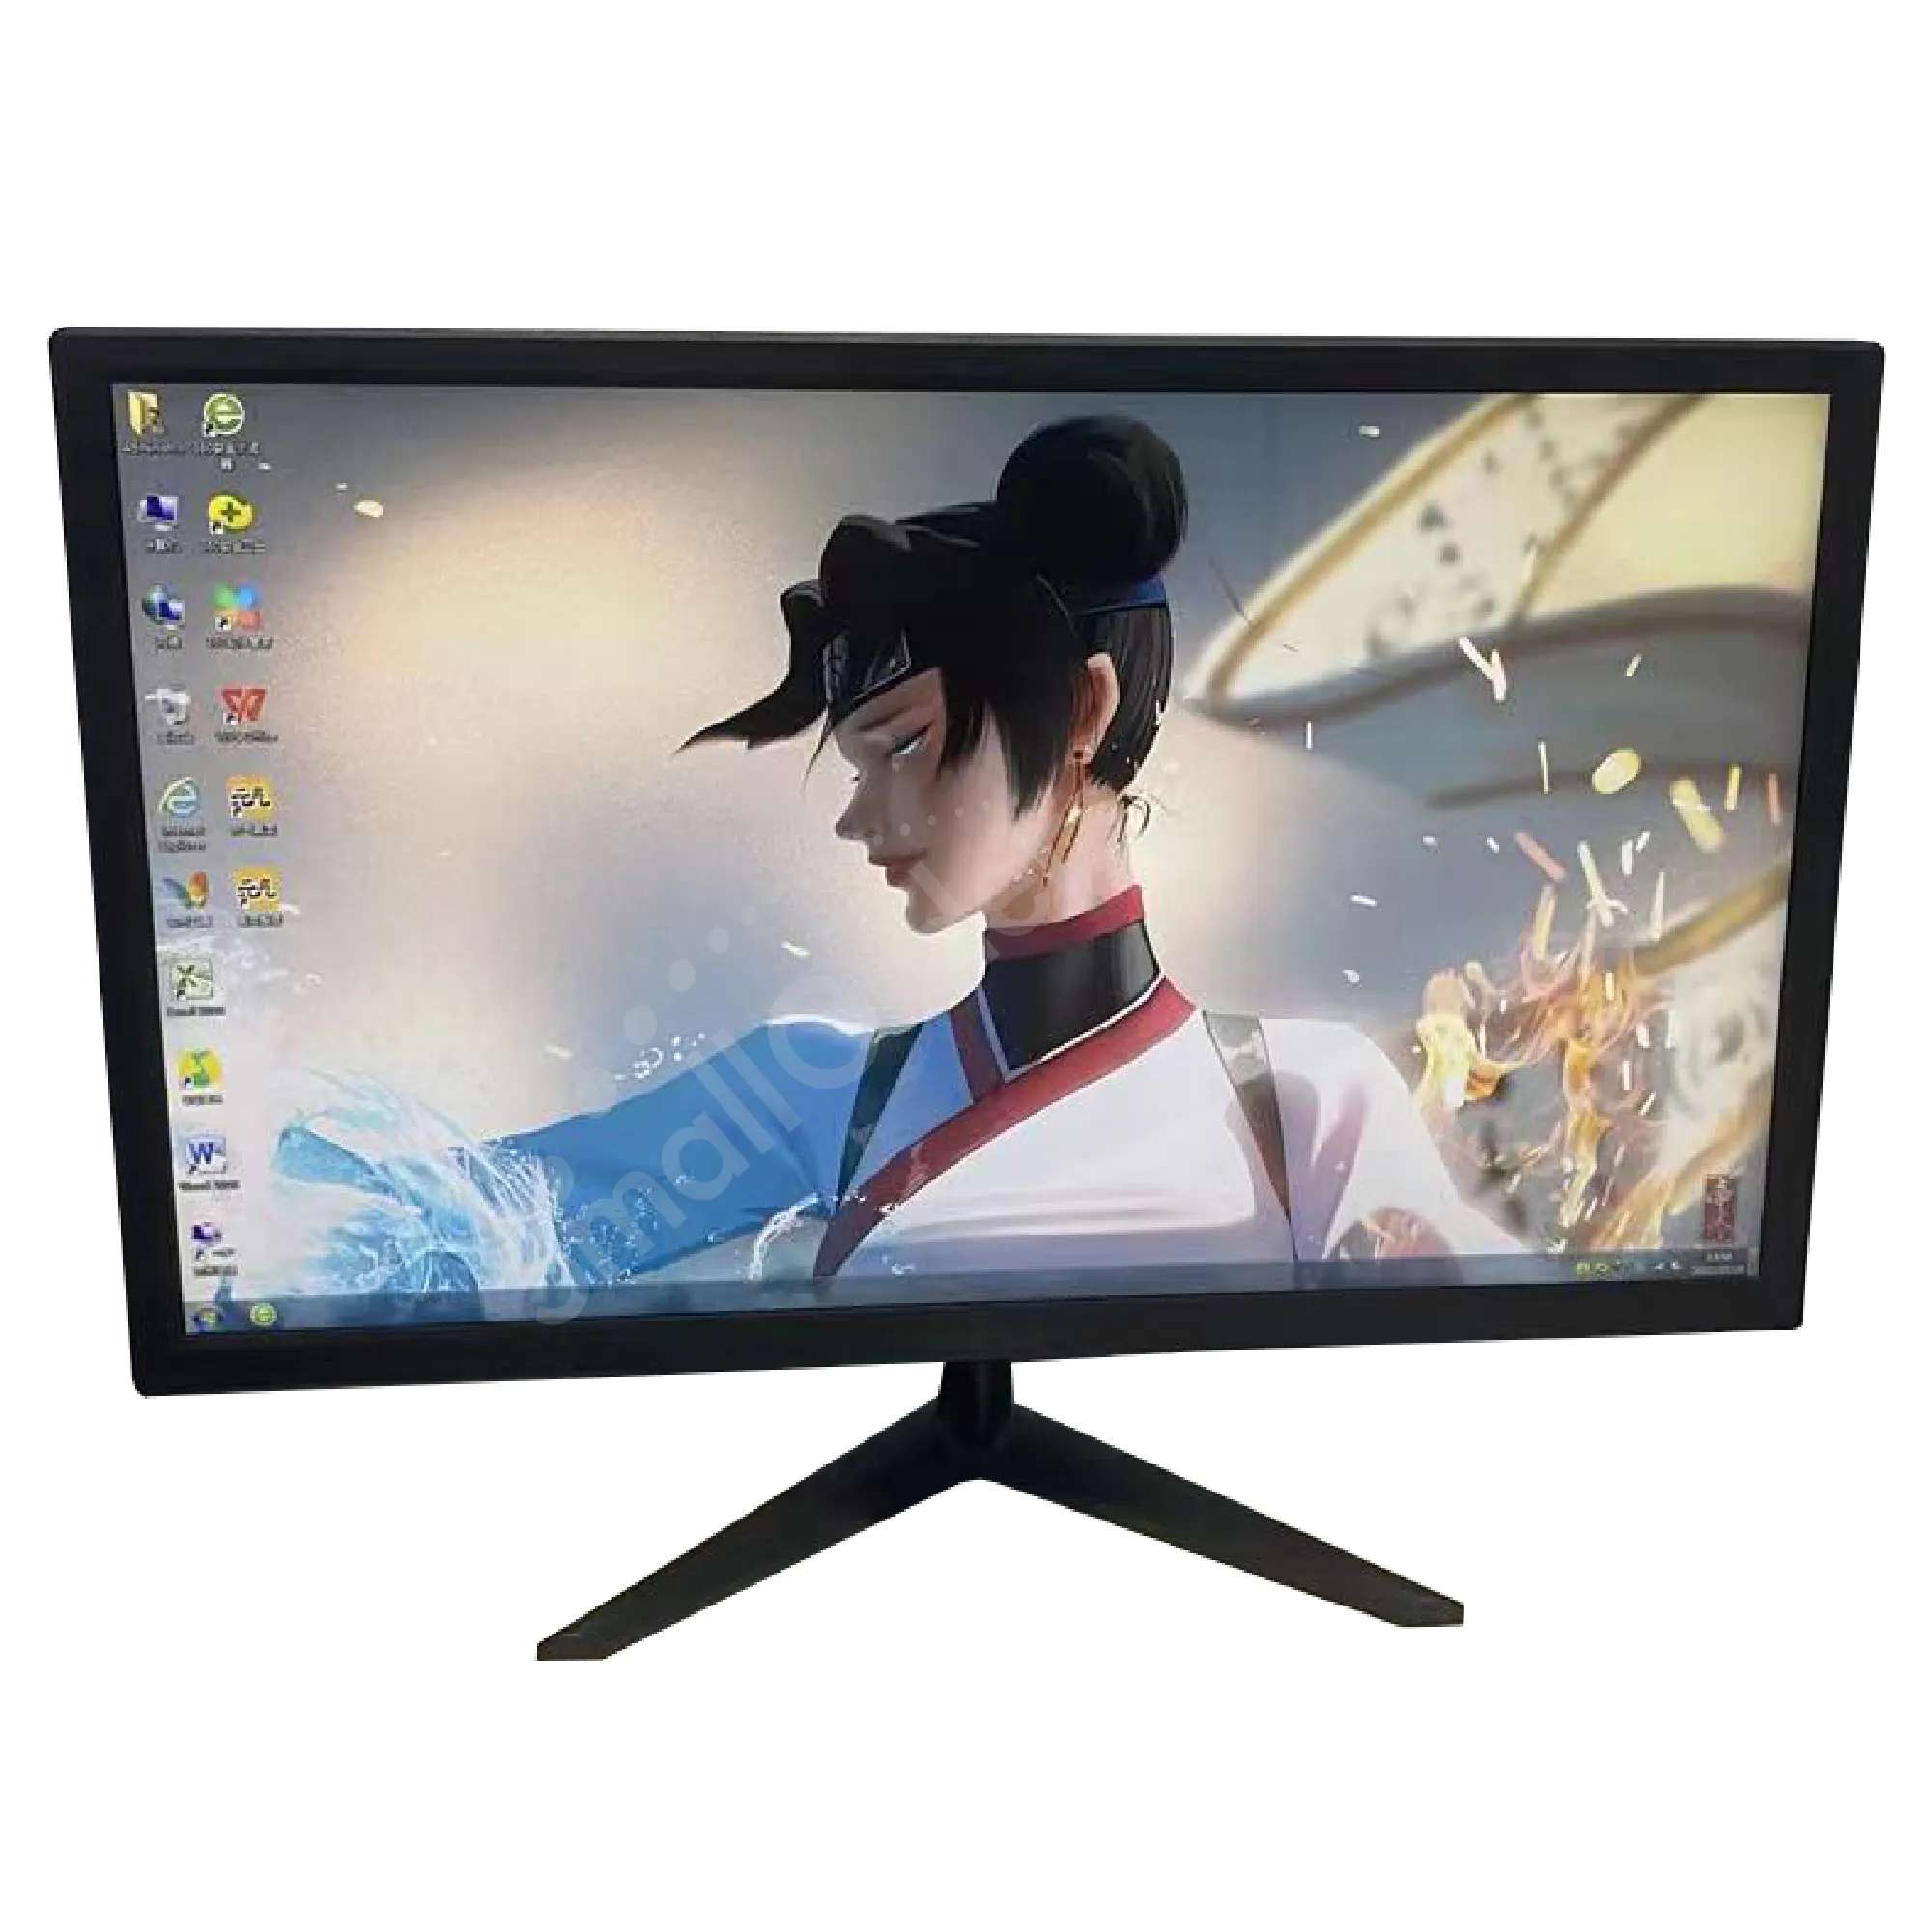 2024 new product ideas 2024 computer pc LED LCD desktop hd xxx video monitor gaming FHD display screen monitors pc computer